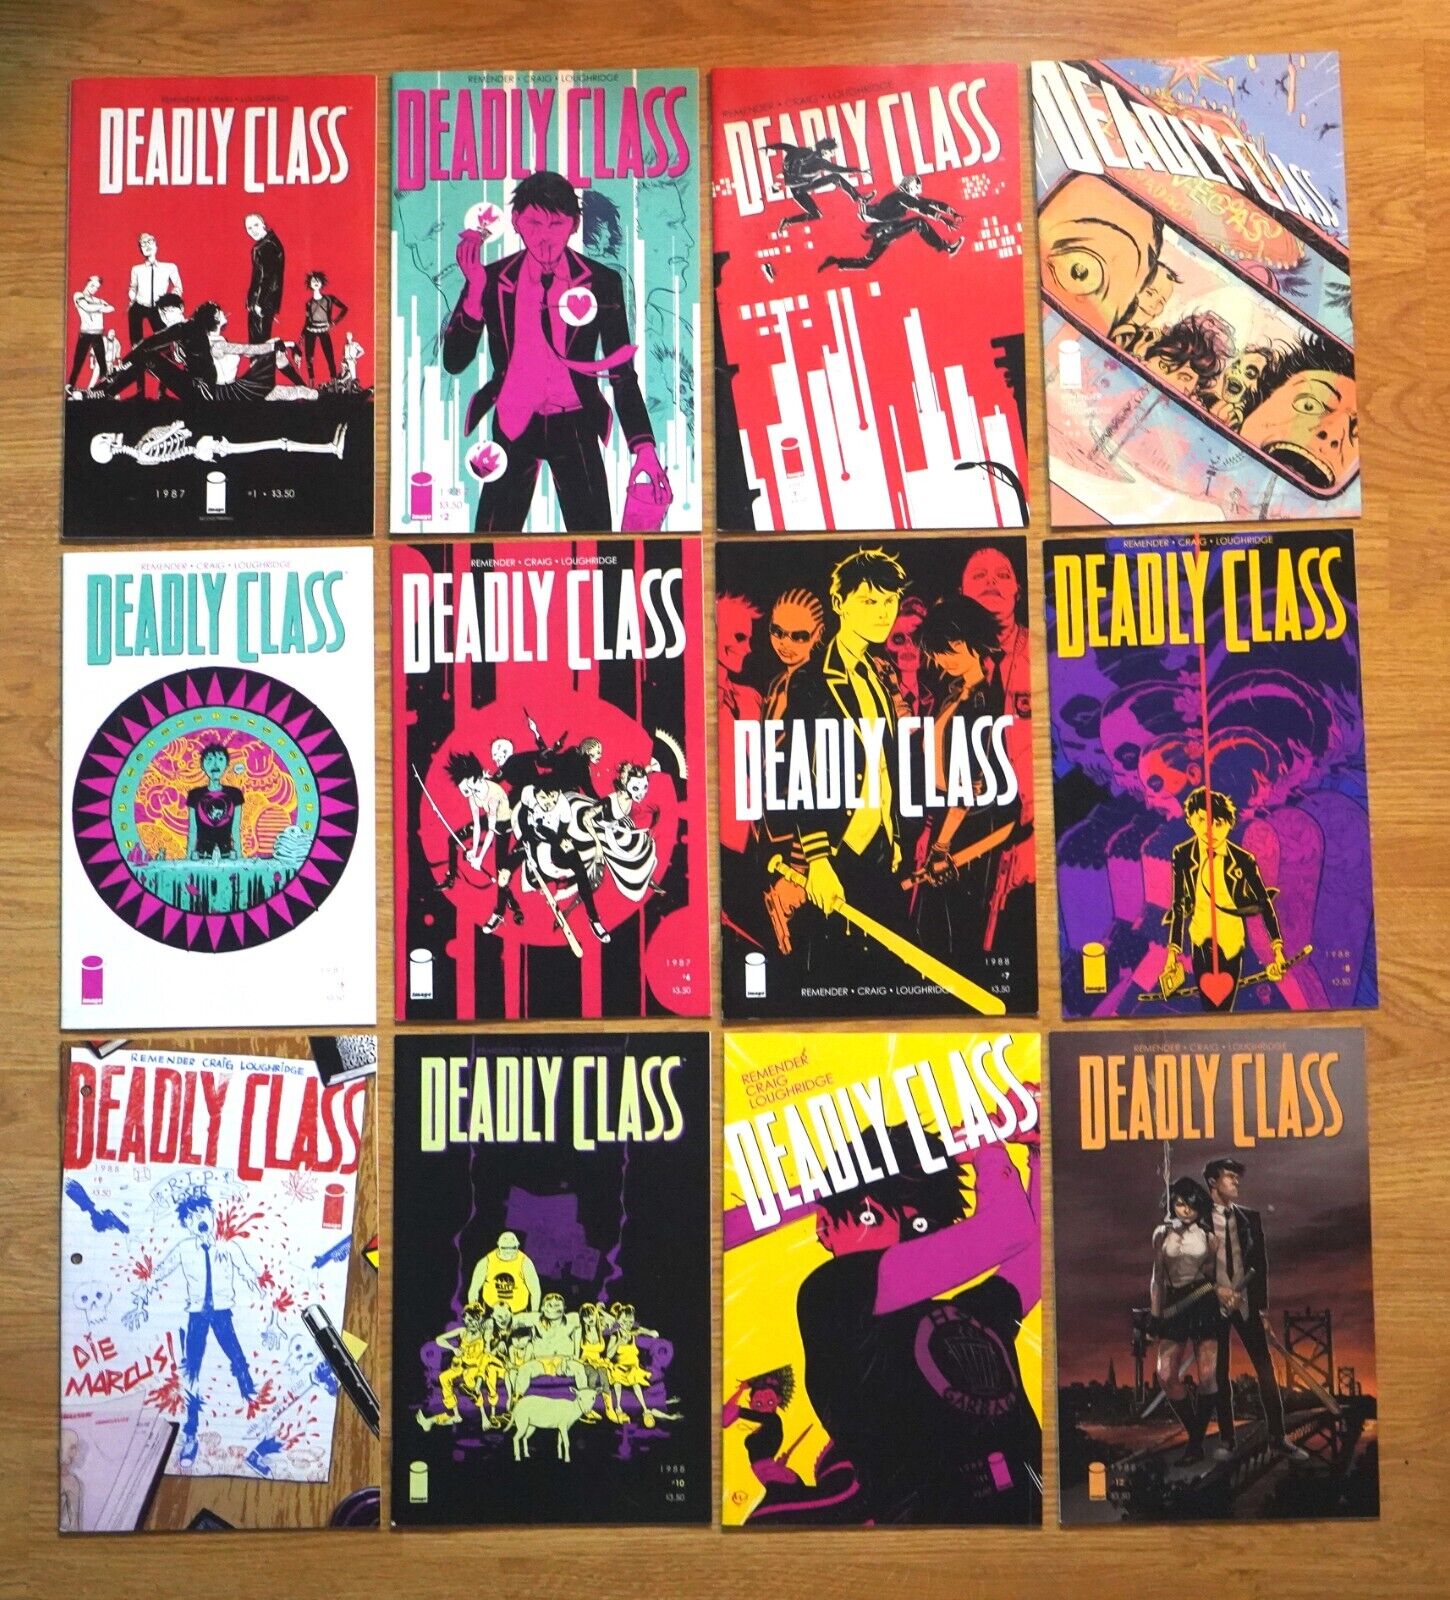 DEADLY CLASS #1-56 + FCBD by Rick Remender & Wes Craig - COMPLETE SERIES